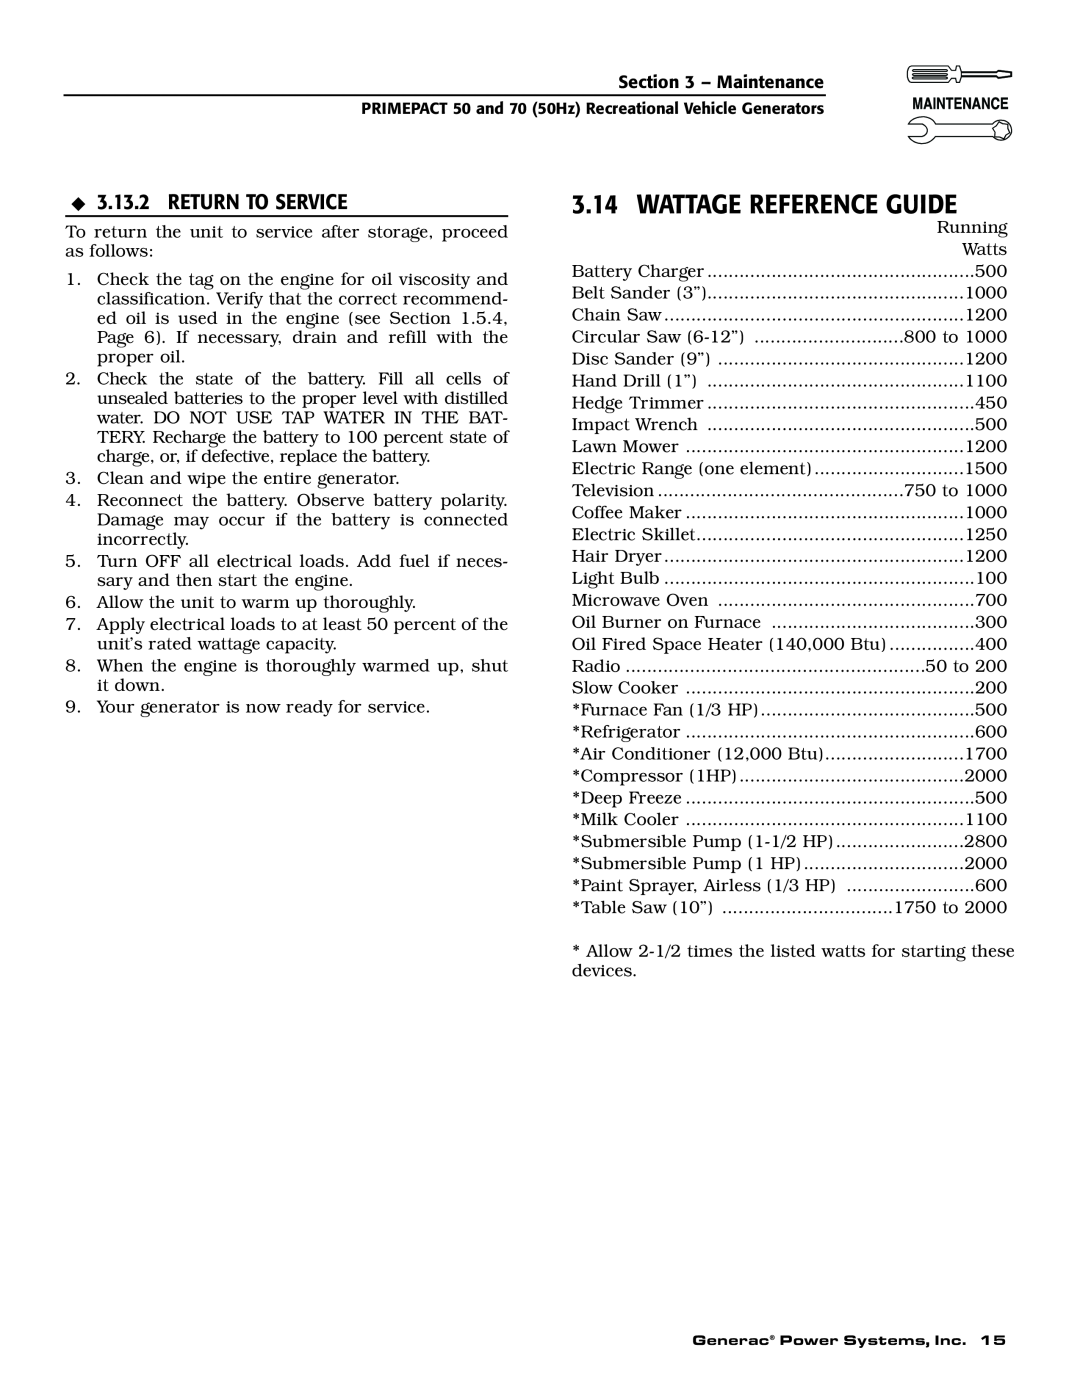 Generac 00784-2, 09290-4 owner manual Wattage Reference Guide, Return To Service 